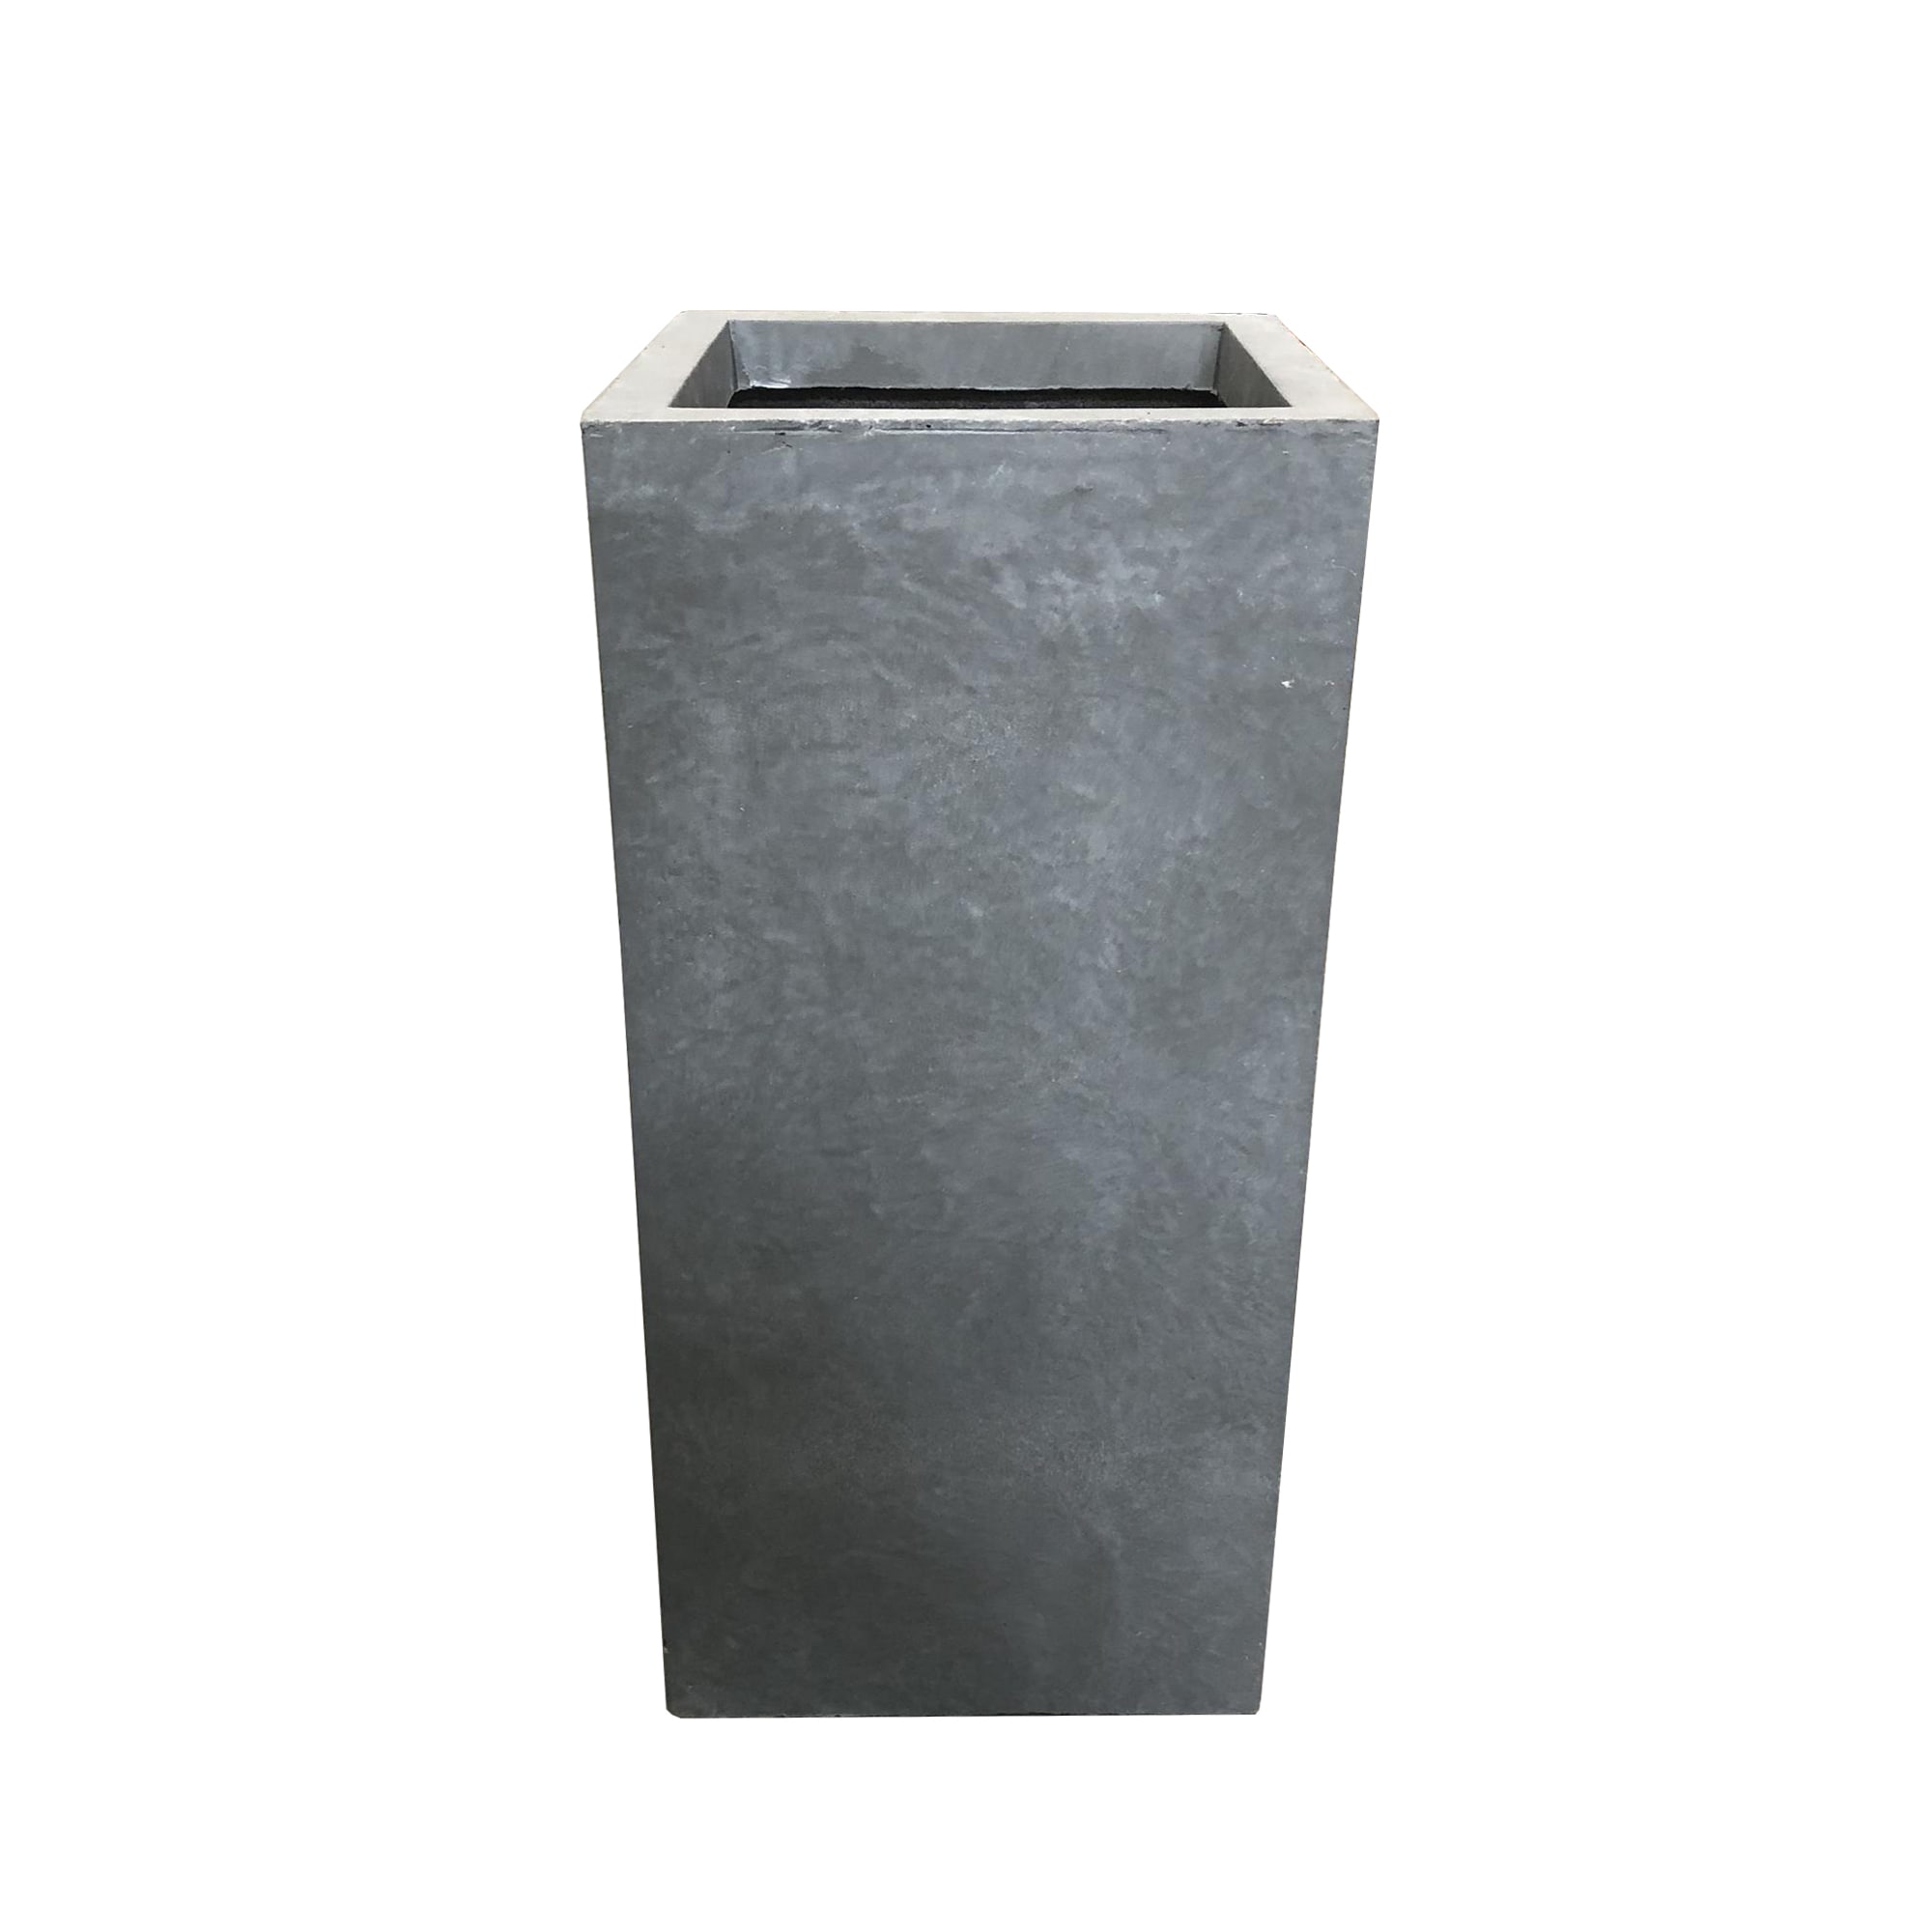 KANTE 9-in x 20-in Slate Gray Concrete Planter with Drainage Holes in ...